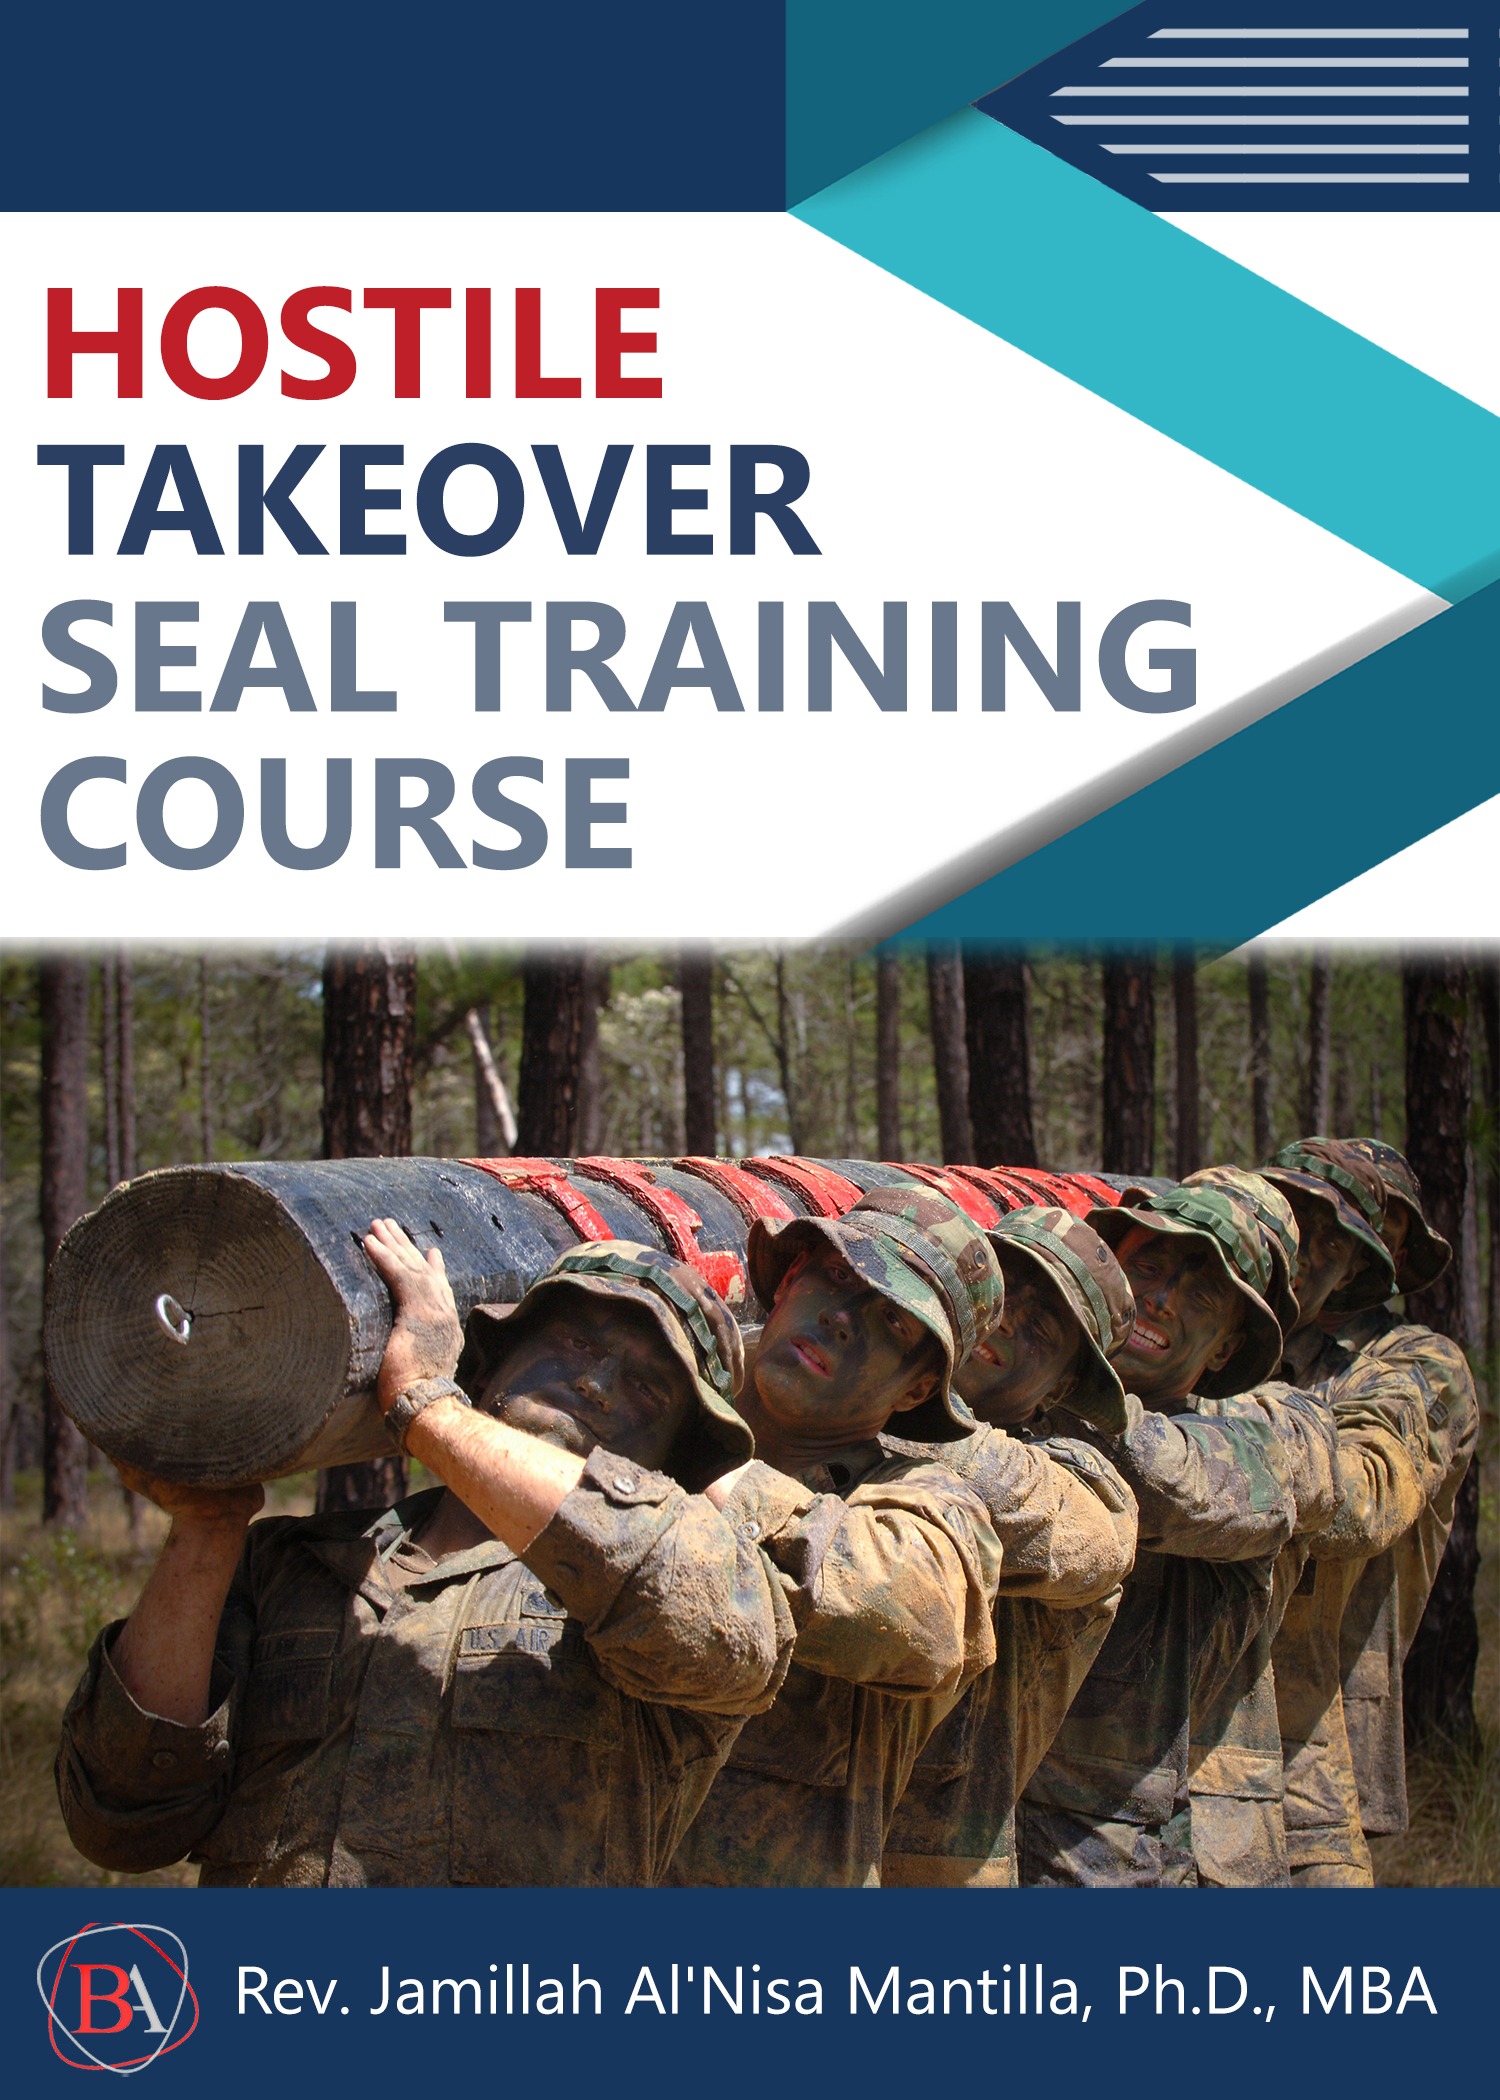 HOSTILE TAKEOVER SEAL TRAINING COURSE 